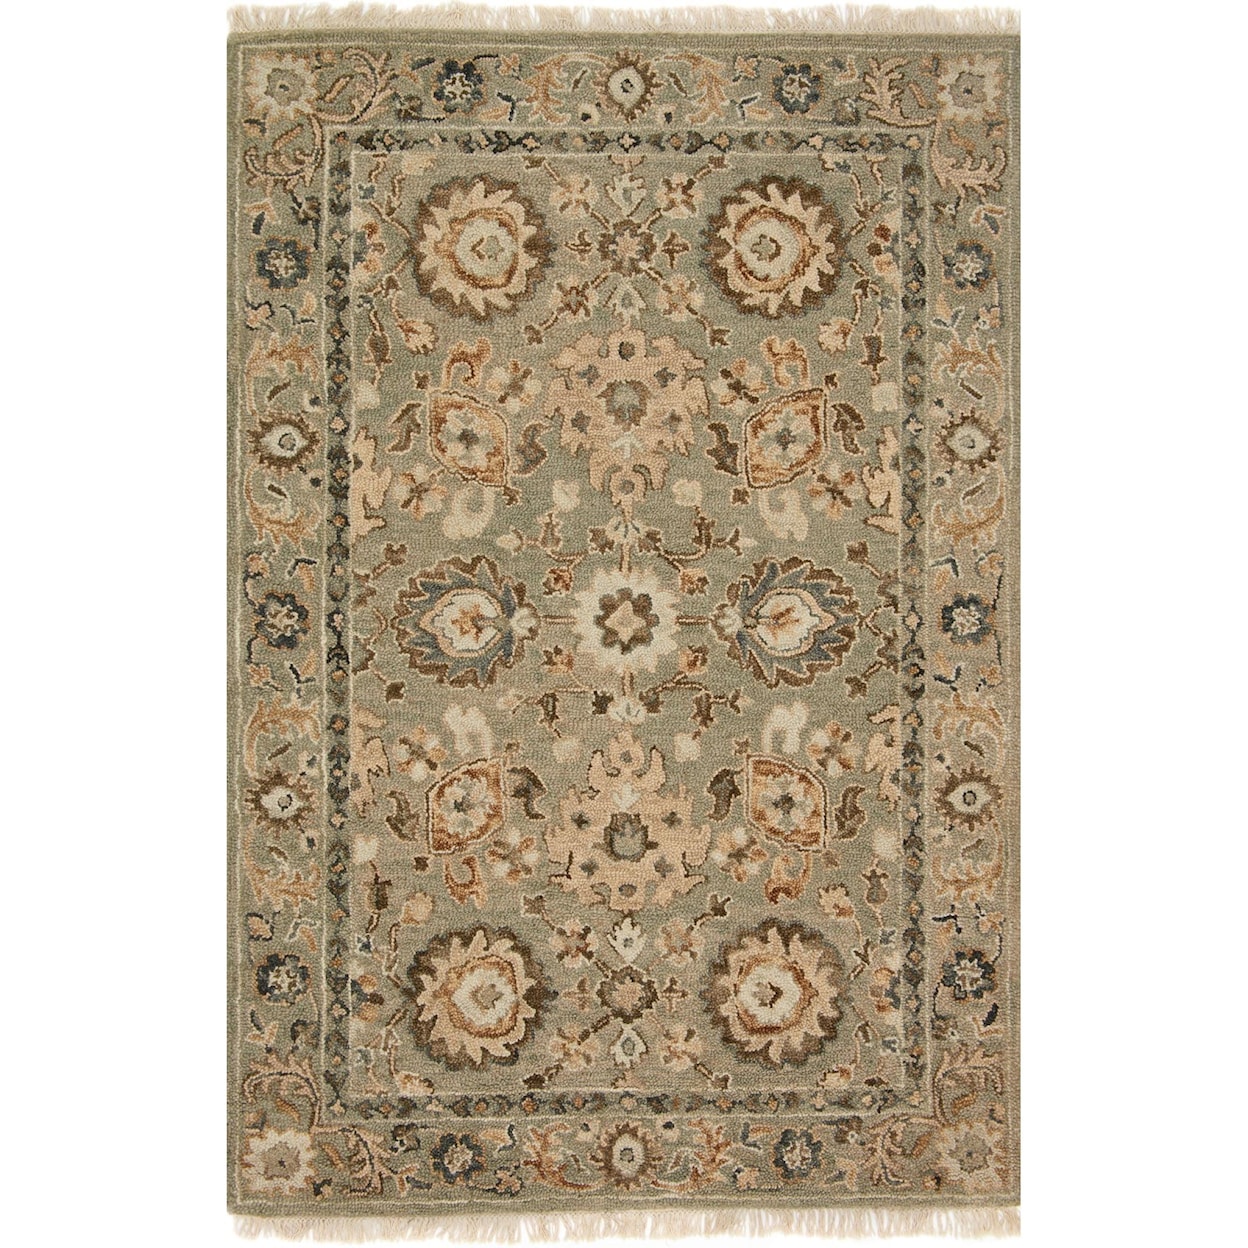 Magnolia Home by Joanna Gaines for Loloi Hanover 7' 9" X 7' 9" Round Rug